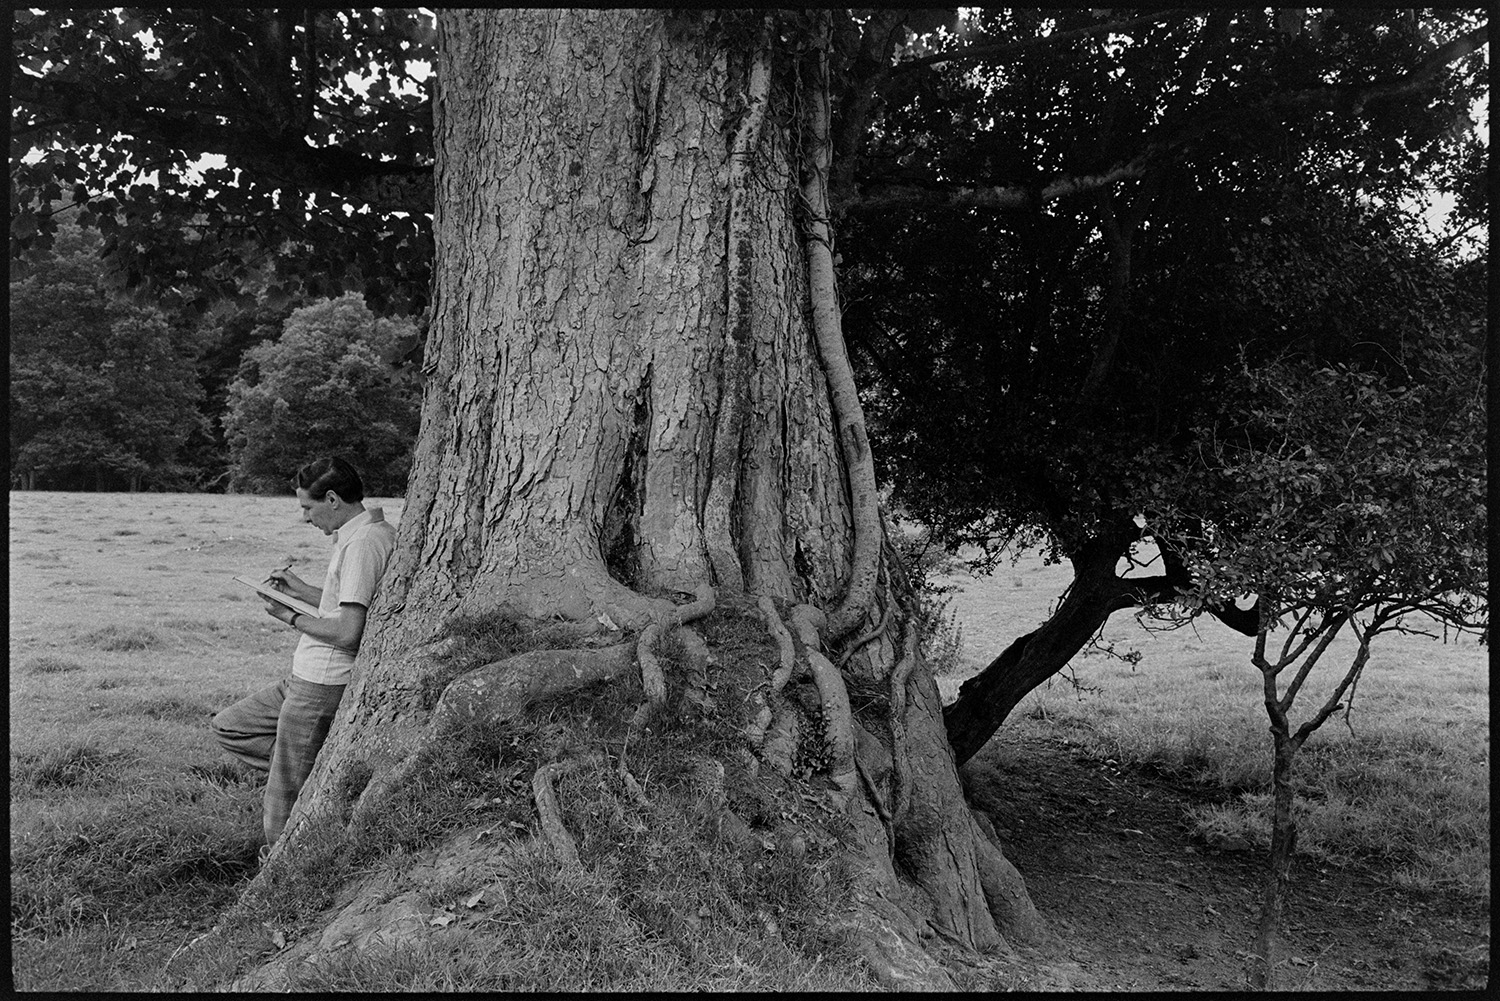 Guided nature walk on nature reserve. 
[A man sketching by the trunk of an oak tree at Halsdon Nature Reserve, Dolton, whilst on a guided nature walk.]